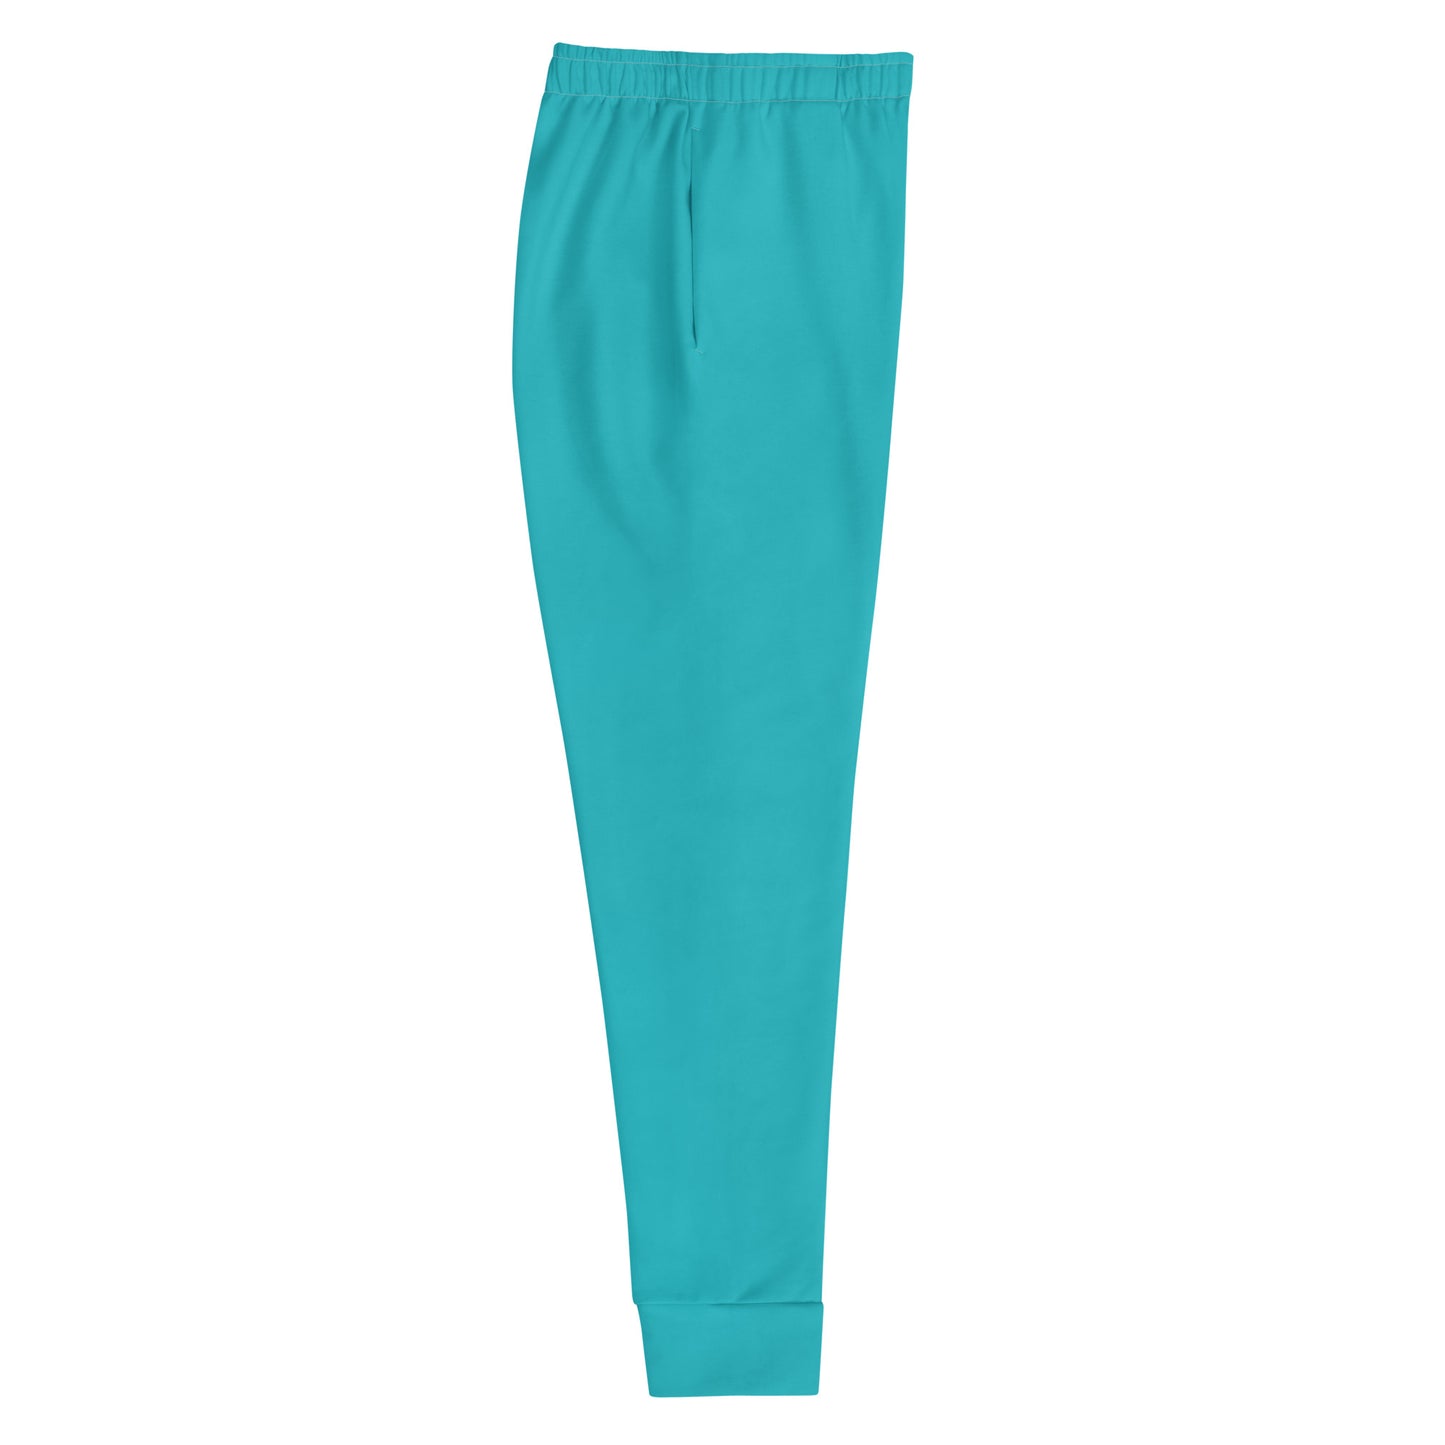 Cyan Climate Change Global Warming Statement - Sustainably Made Women's Joggers